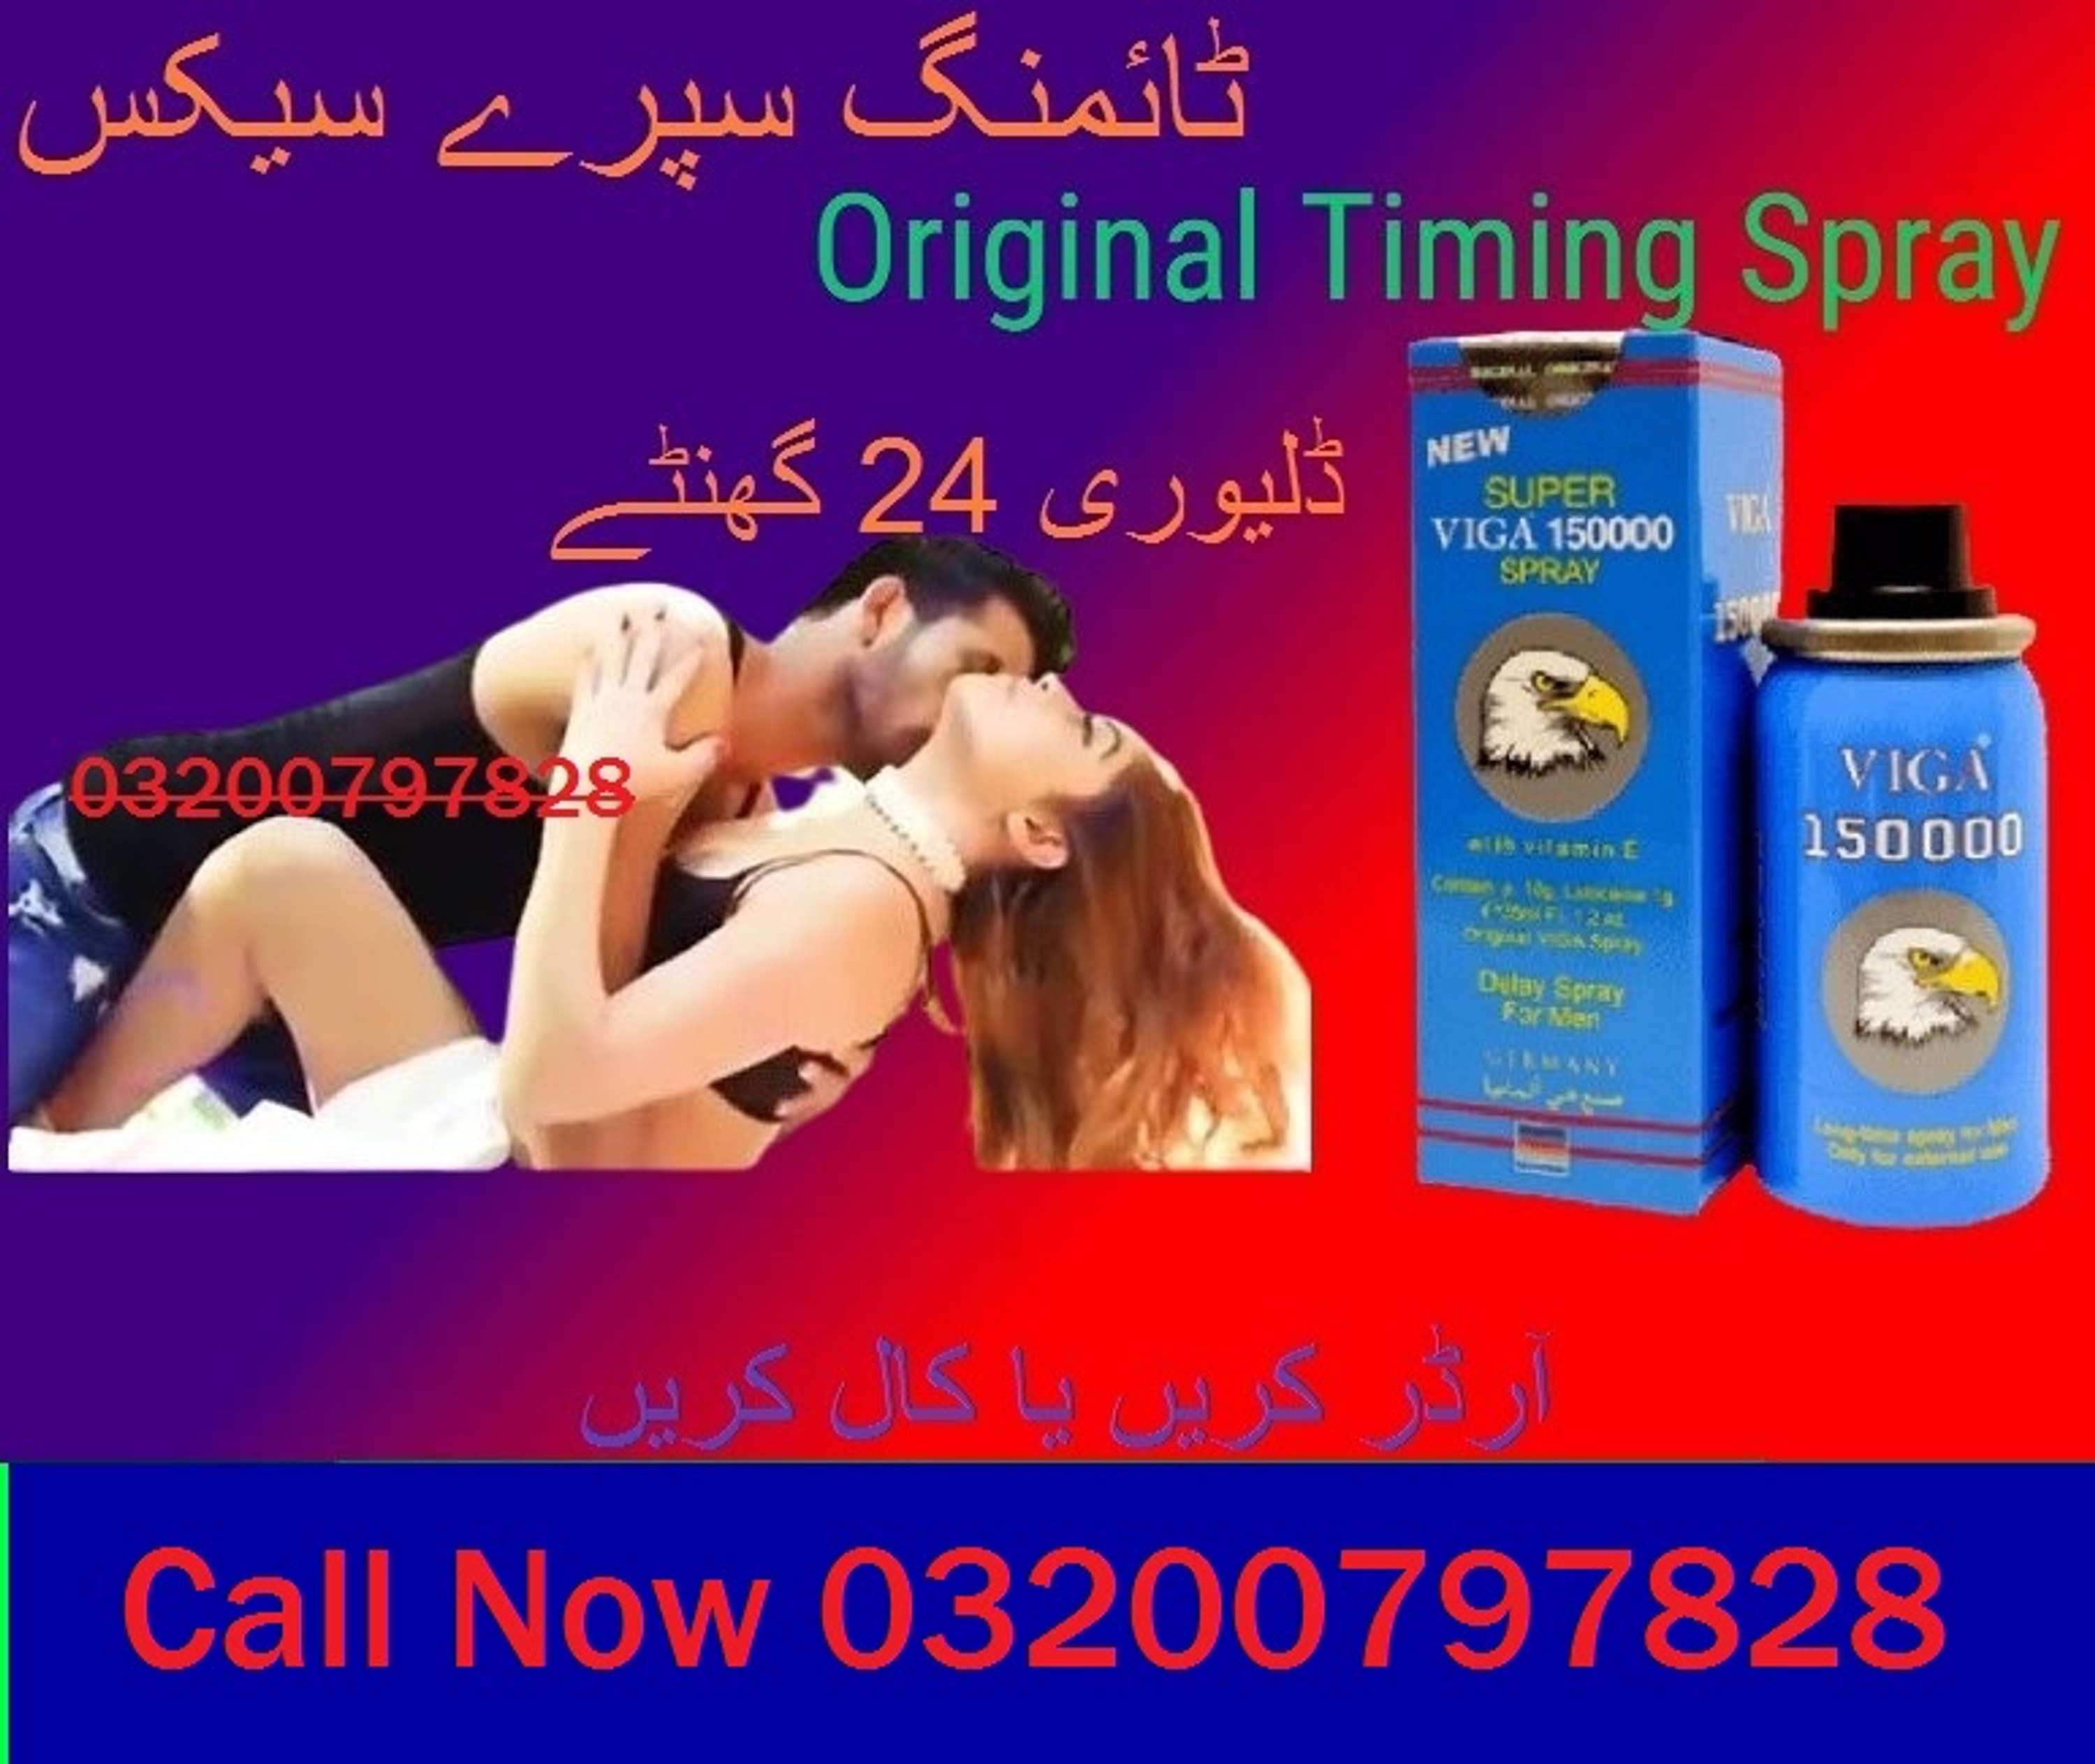 T.a.g dating site in Faisalabad